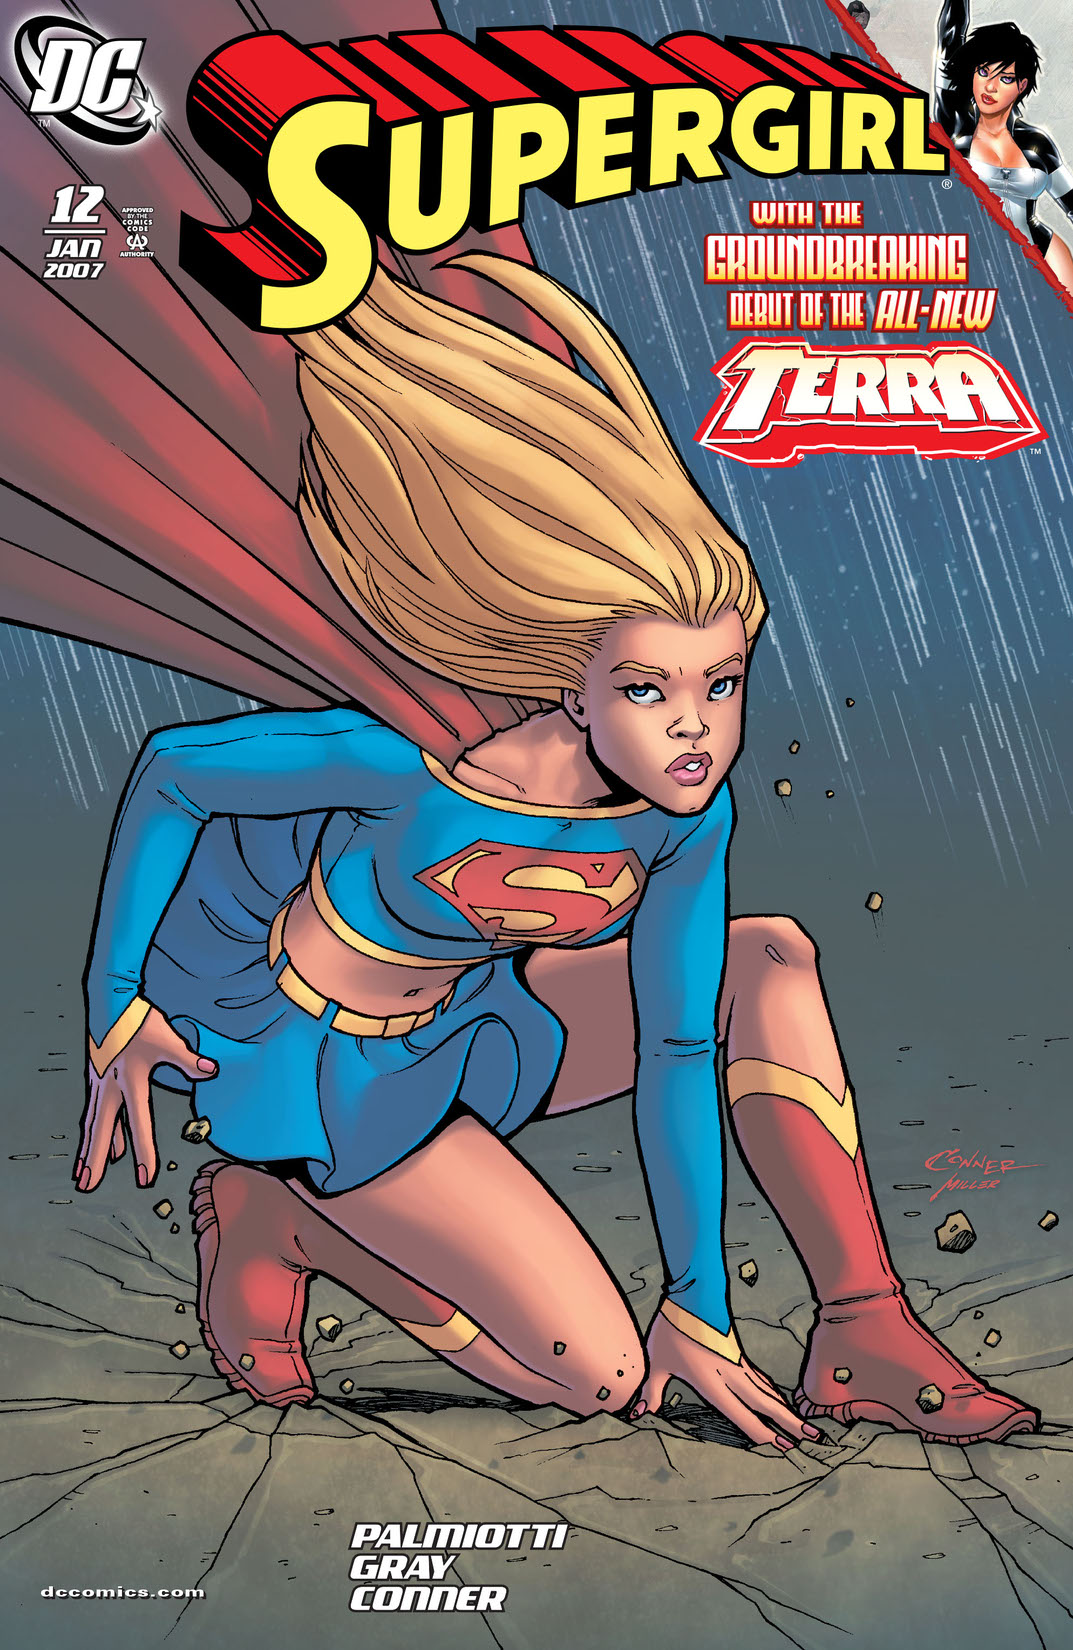 Supergirl (2005-) #12 preview images